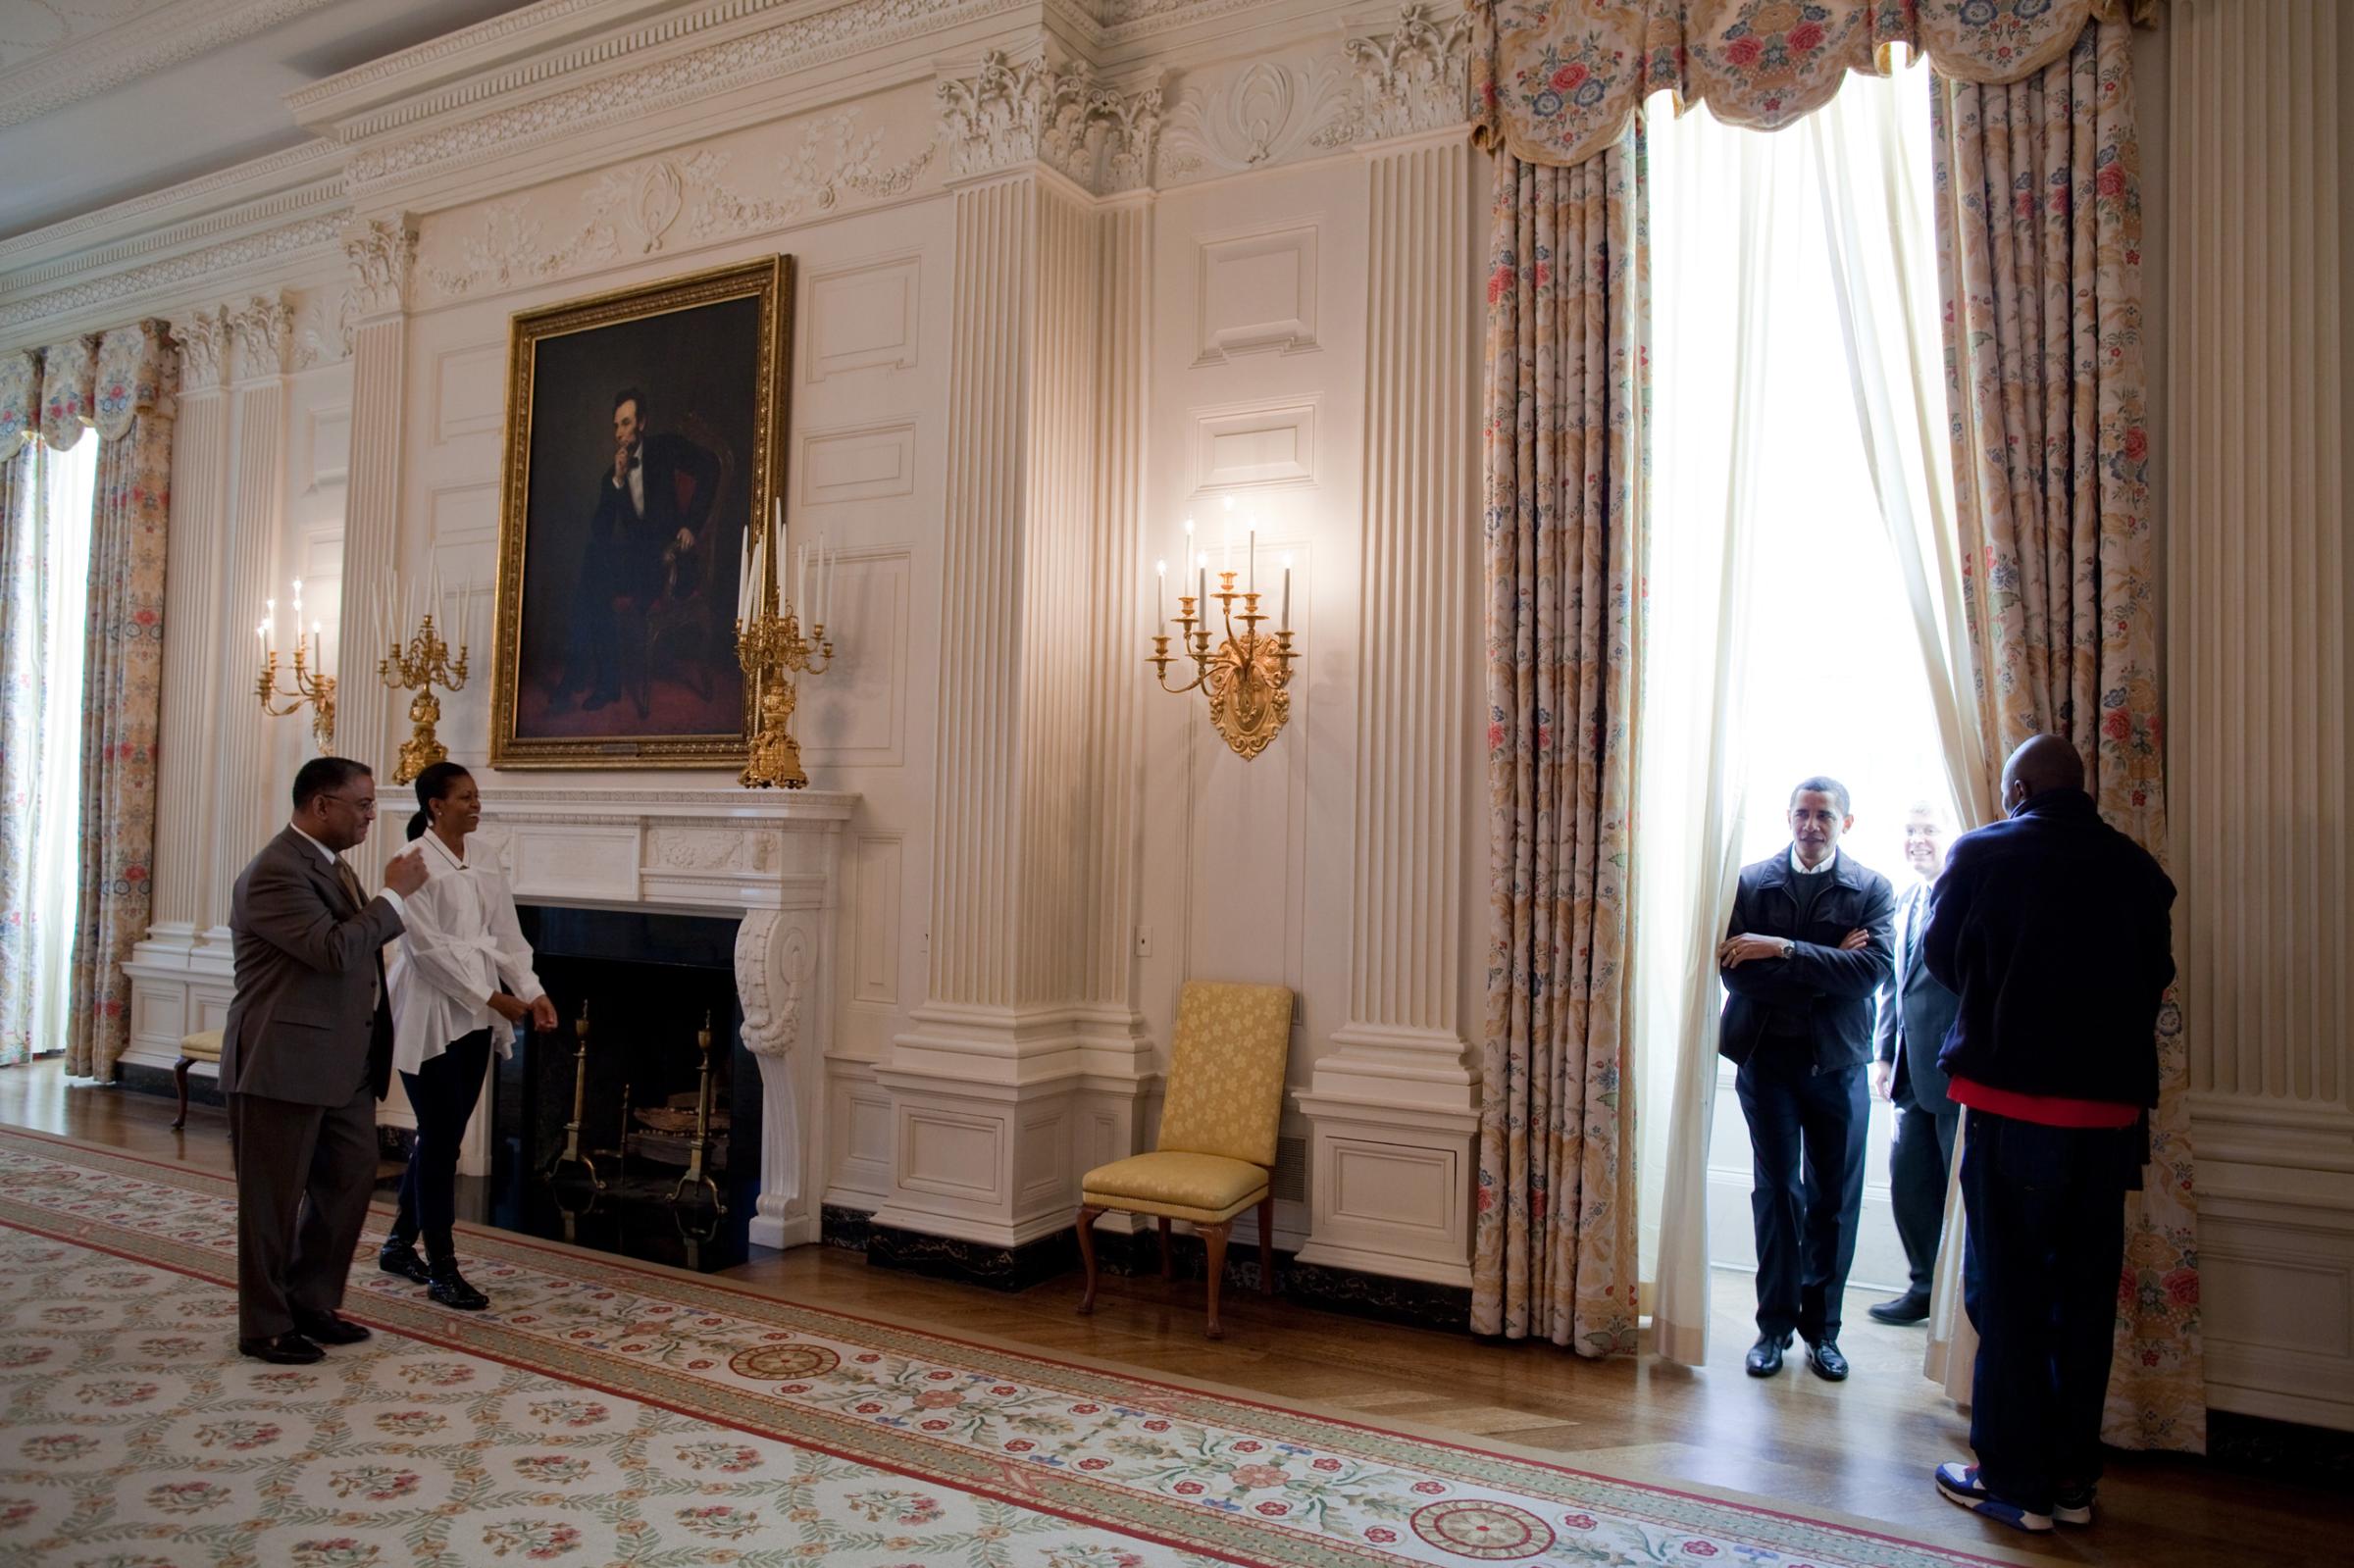 President Barack Obama and First Lady Michelle Obama tour the State Dining Room with White House Chief Usher Admiral Stephen "Steve" Rochon, left; Curator William "Bill" Allman and Personal Aide Reggie Love, right, on Jan. 24, 2009.